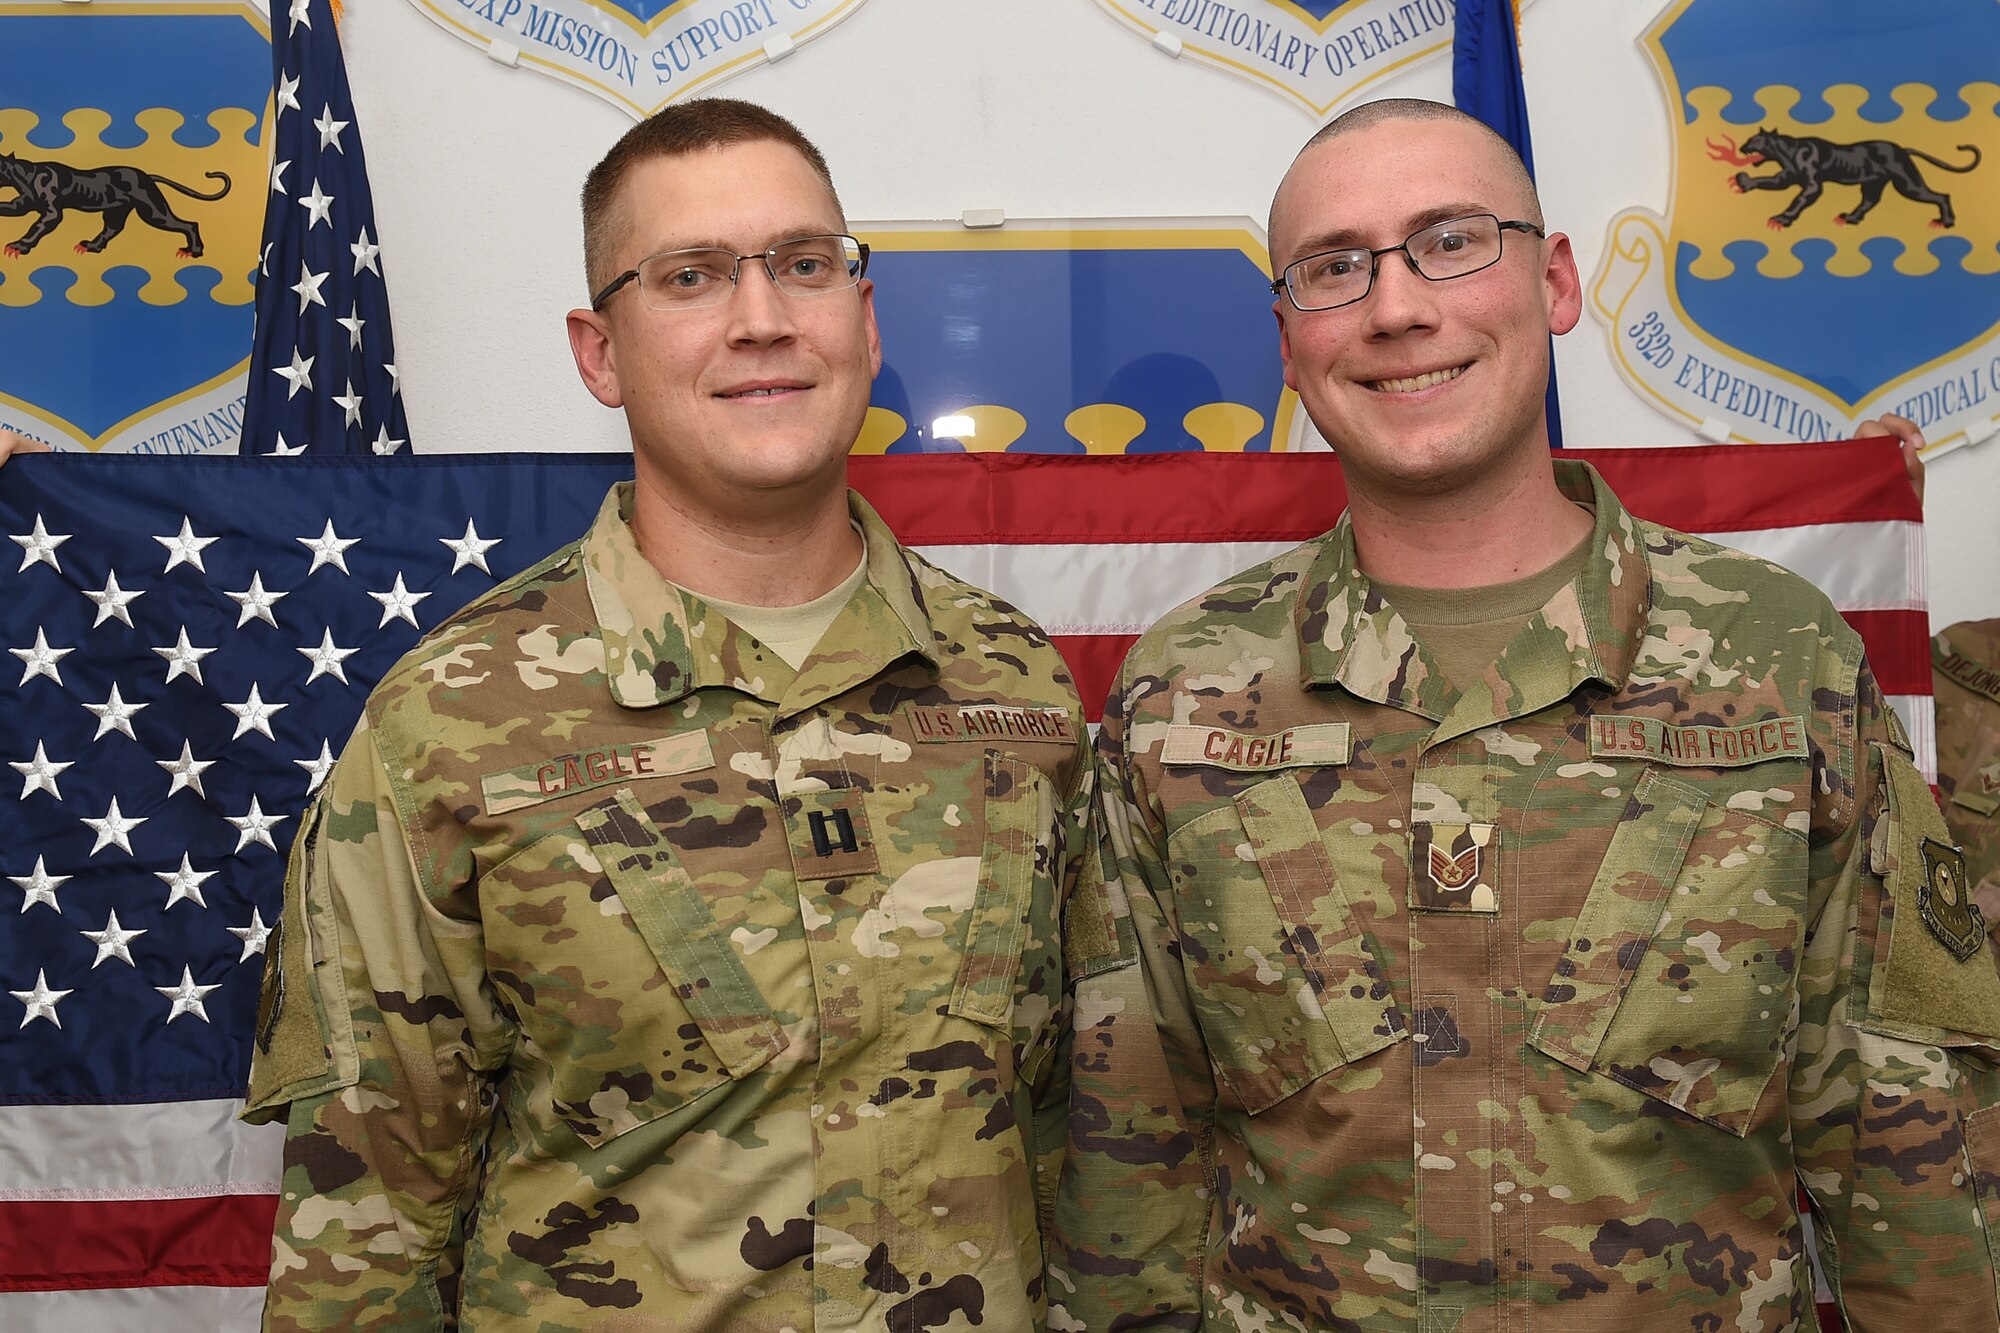 Two Airmen pose for a photo in front of an American flag